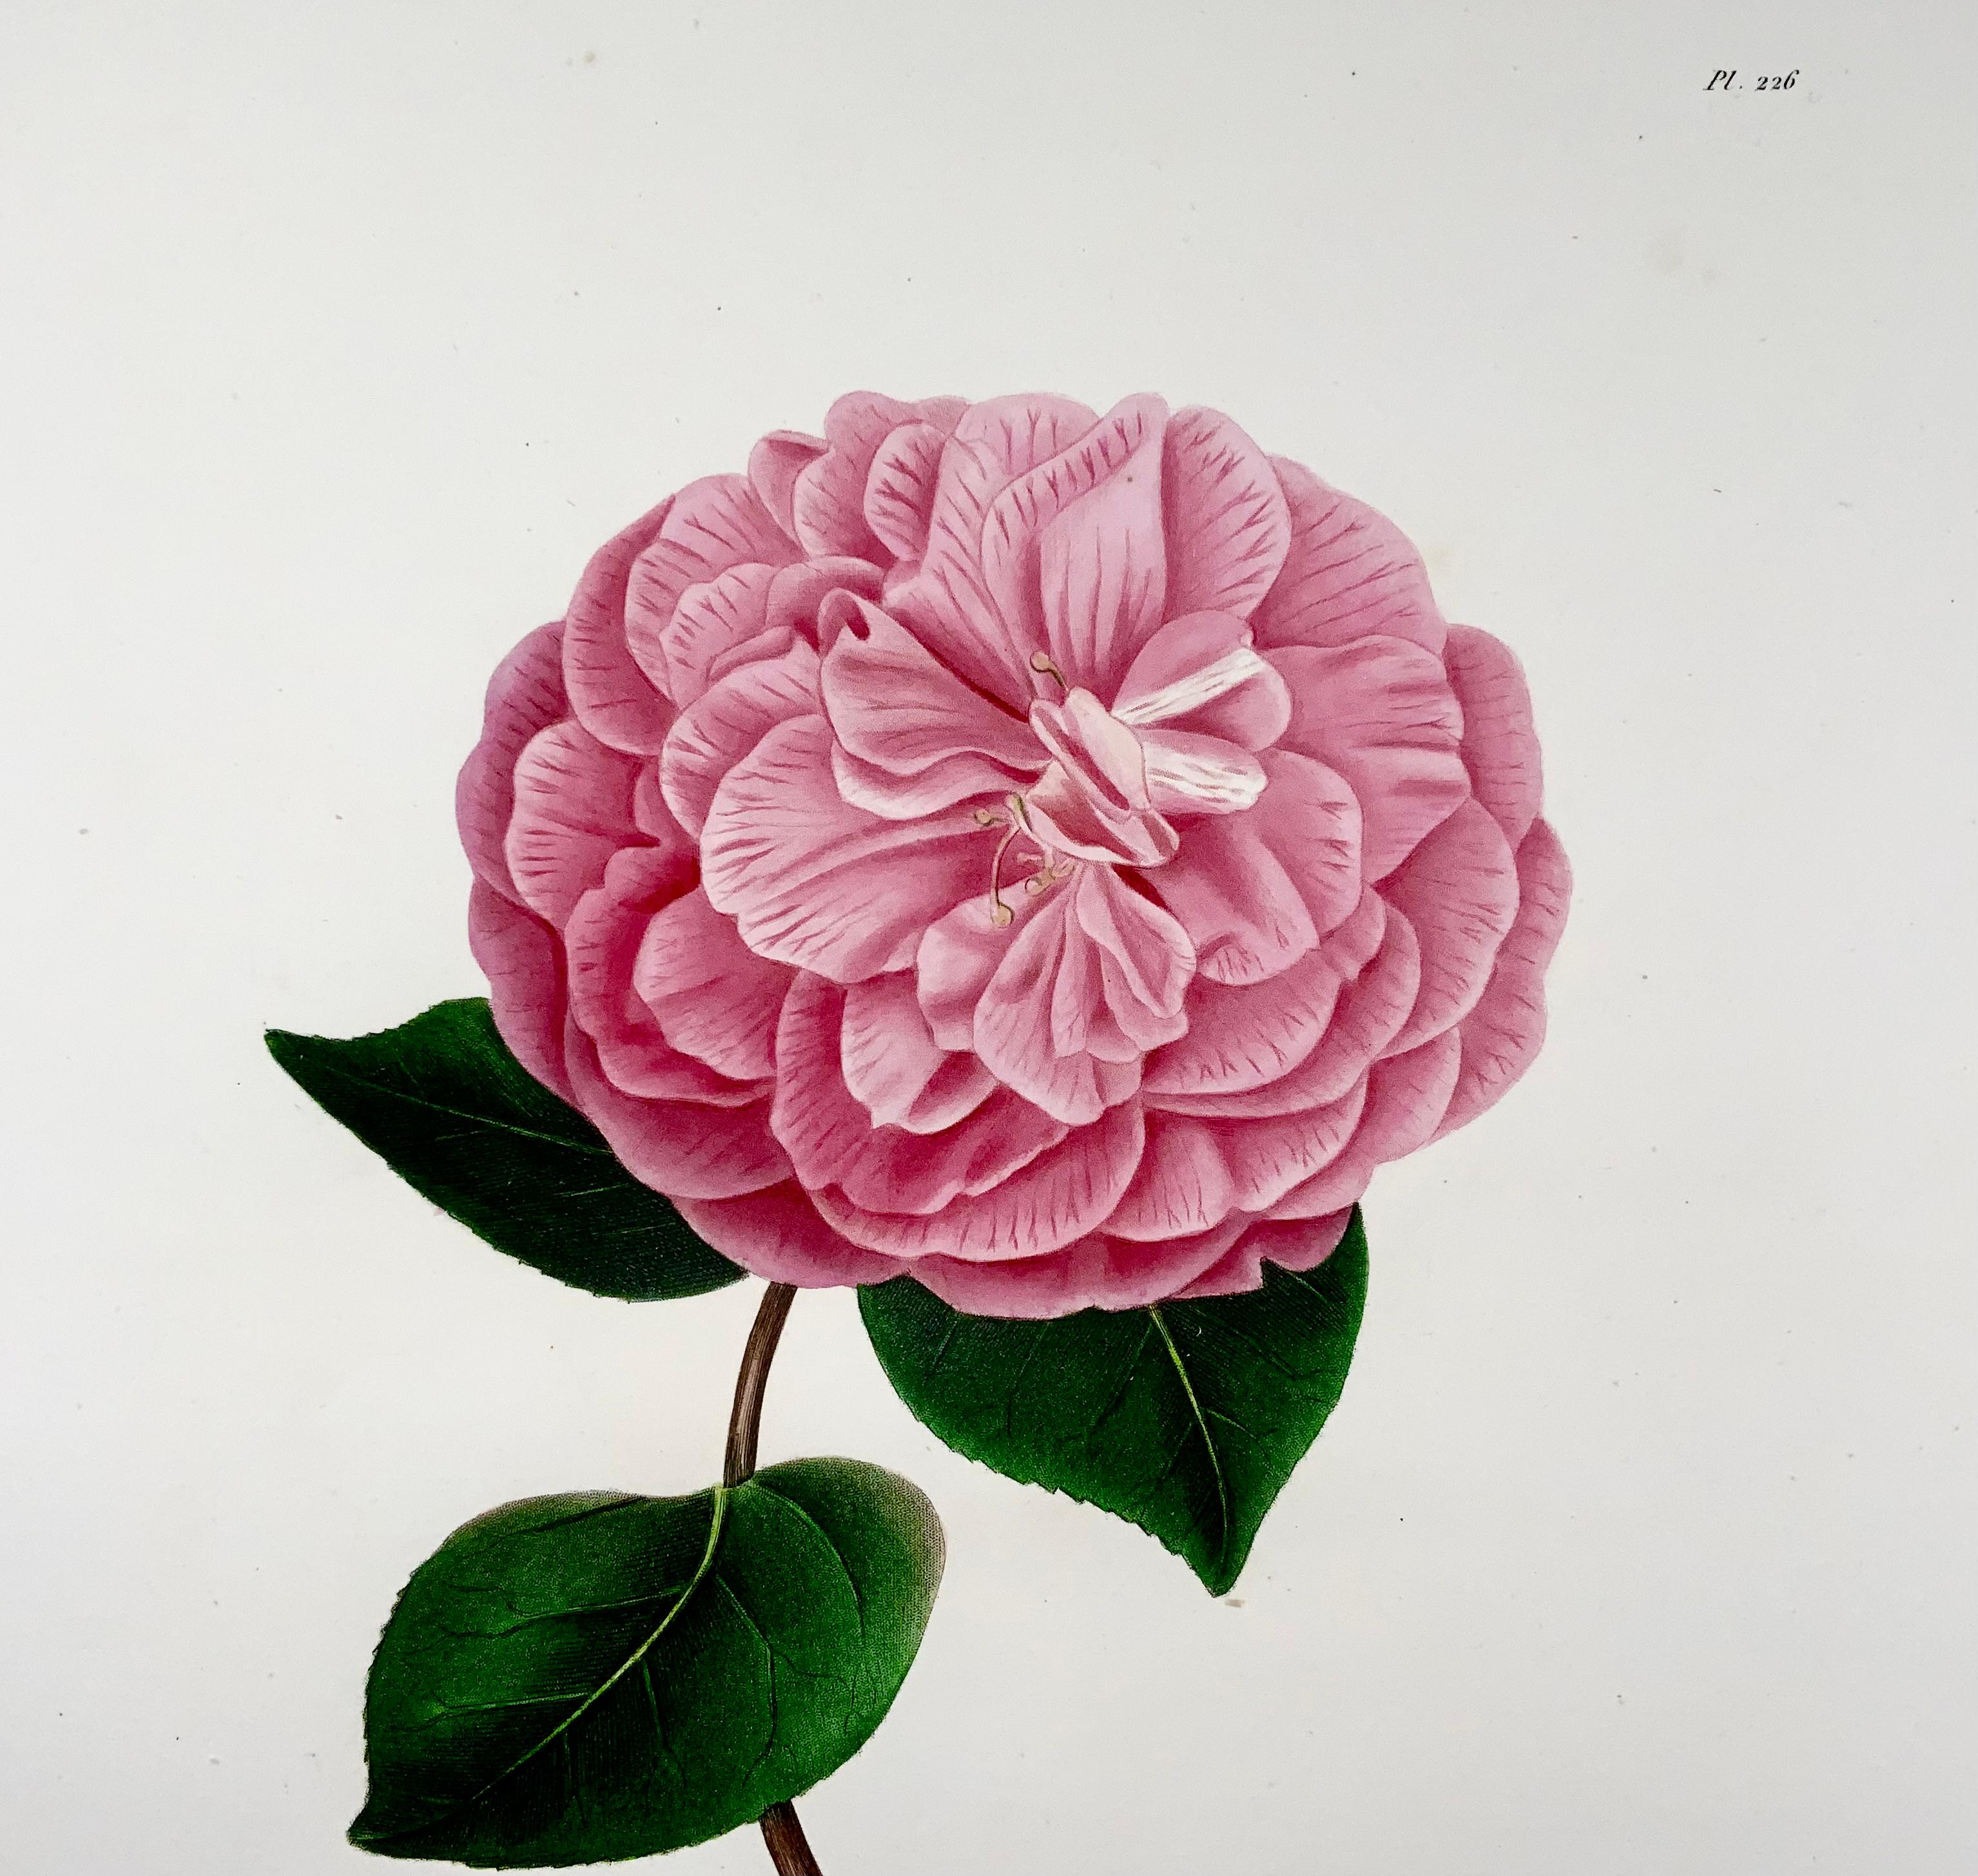 Early Victorian Camelia Cooperii 'Camellia', Drawn by J J Jung, Engraved by Oudet, Berlèse For Sale